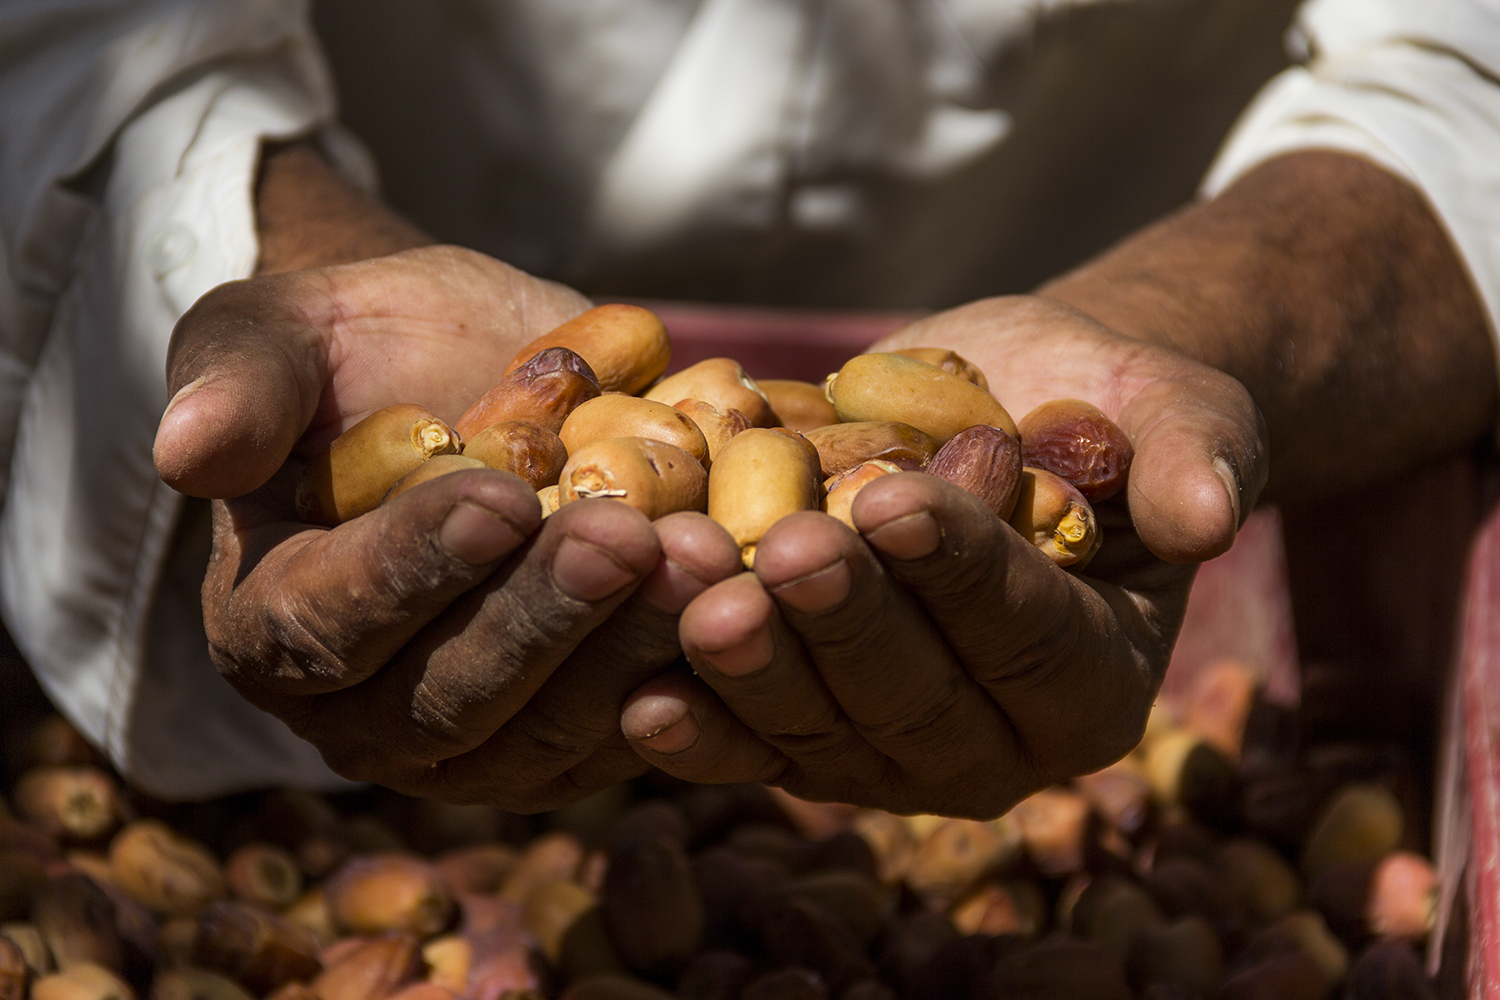 Agriculture in Siwa revolves around dates and olives